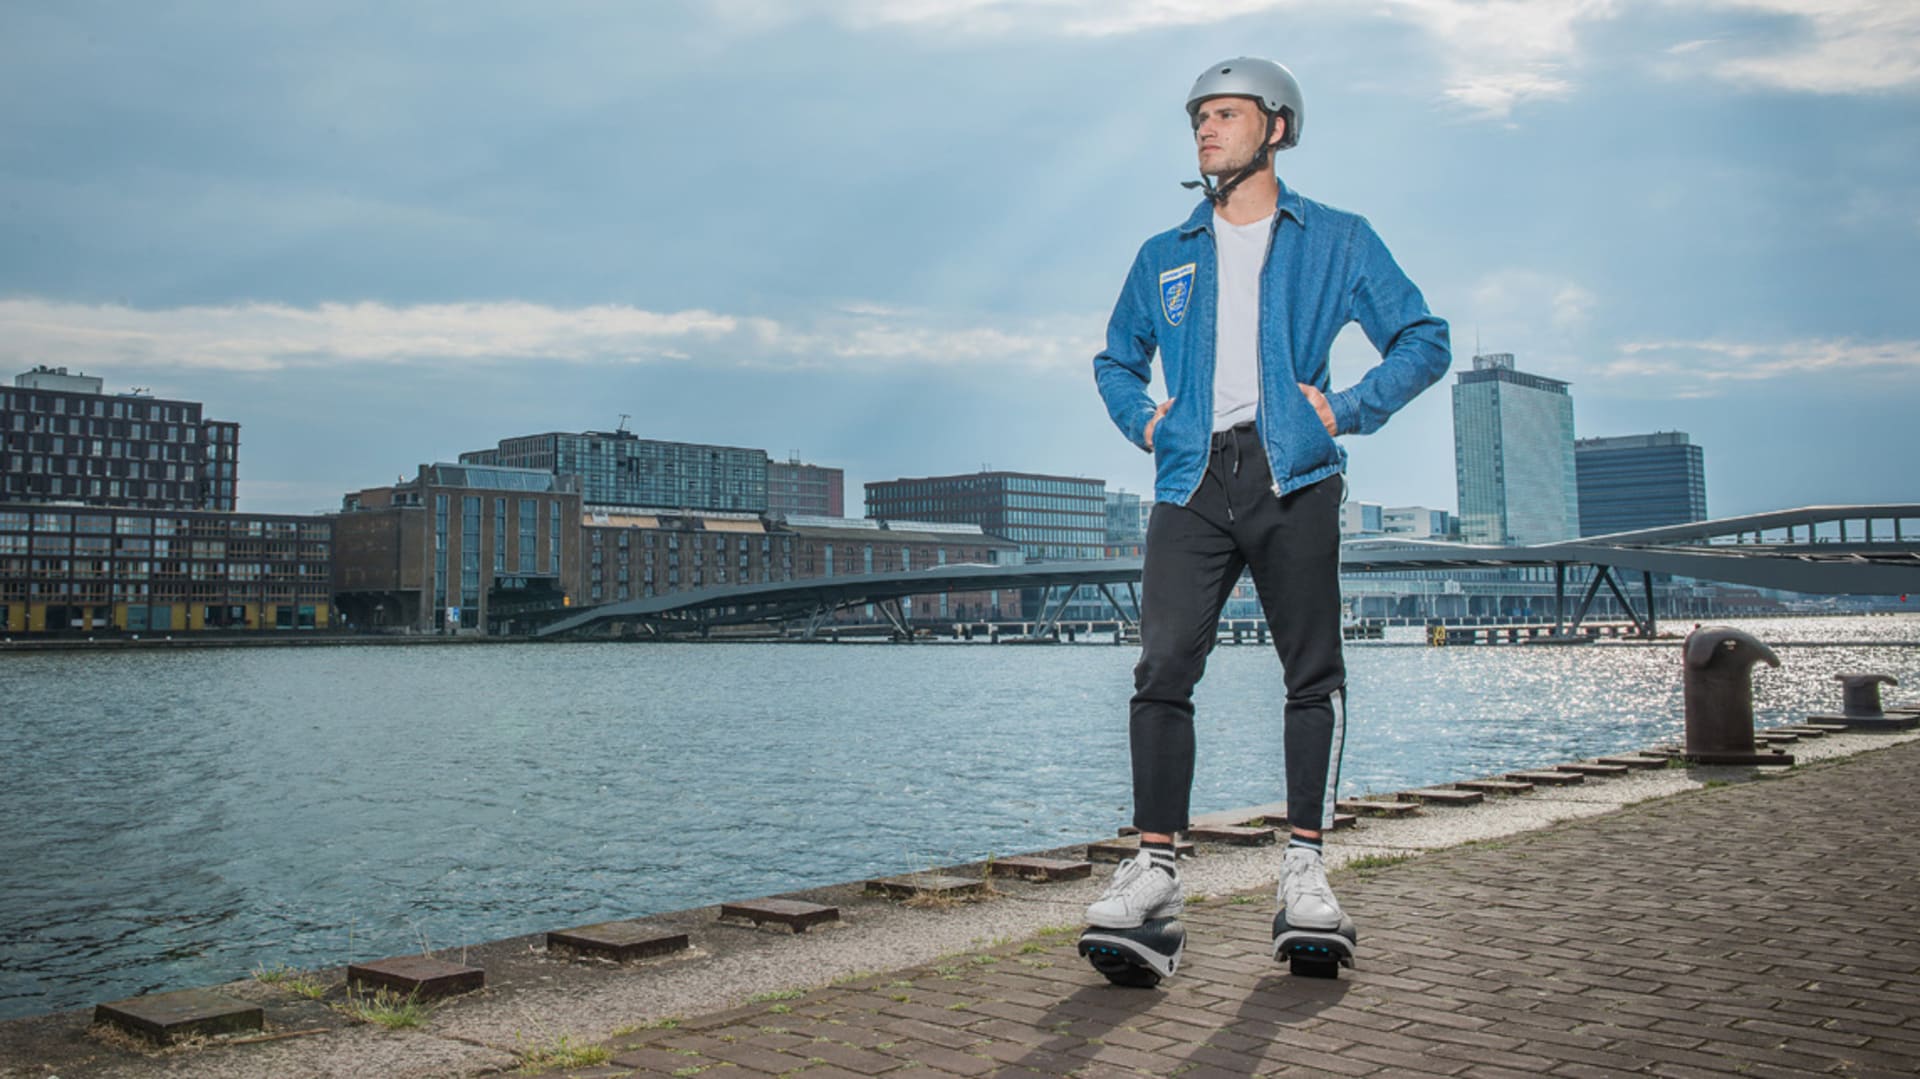 Segway is back, and it’s coming for your last shred of dignity